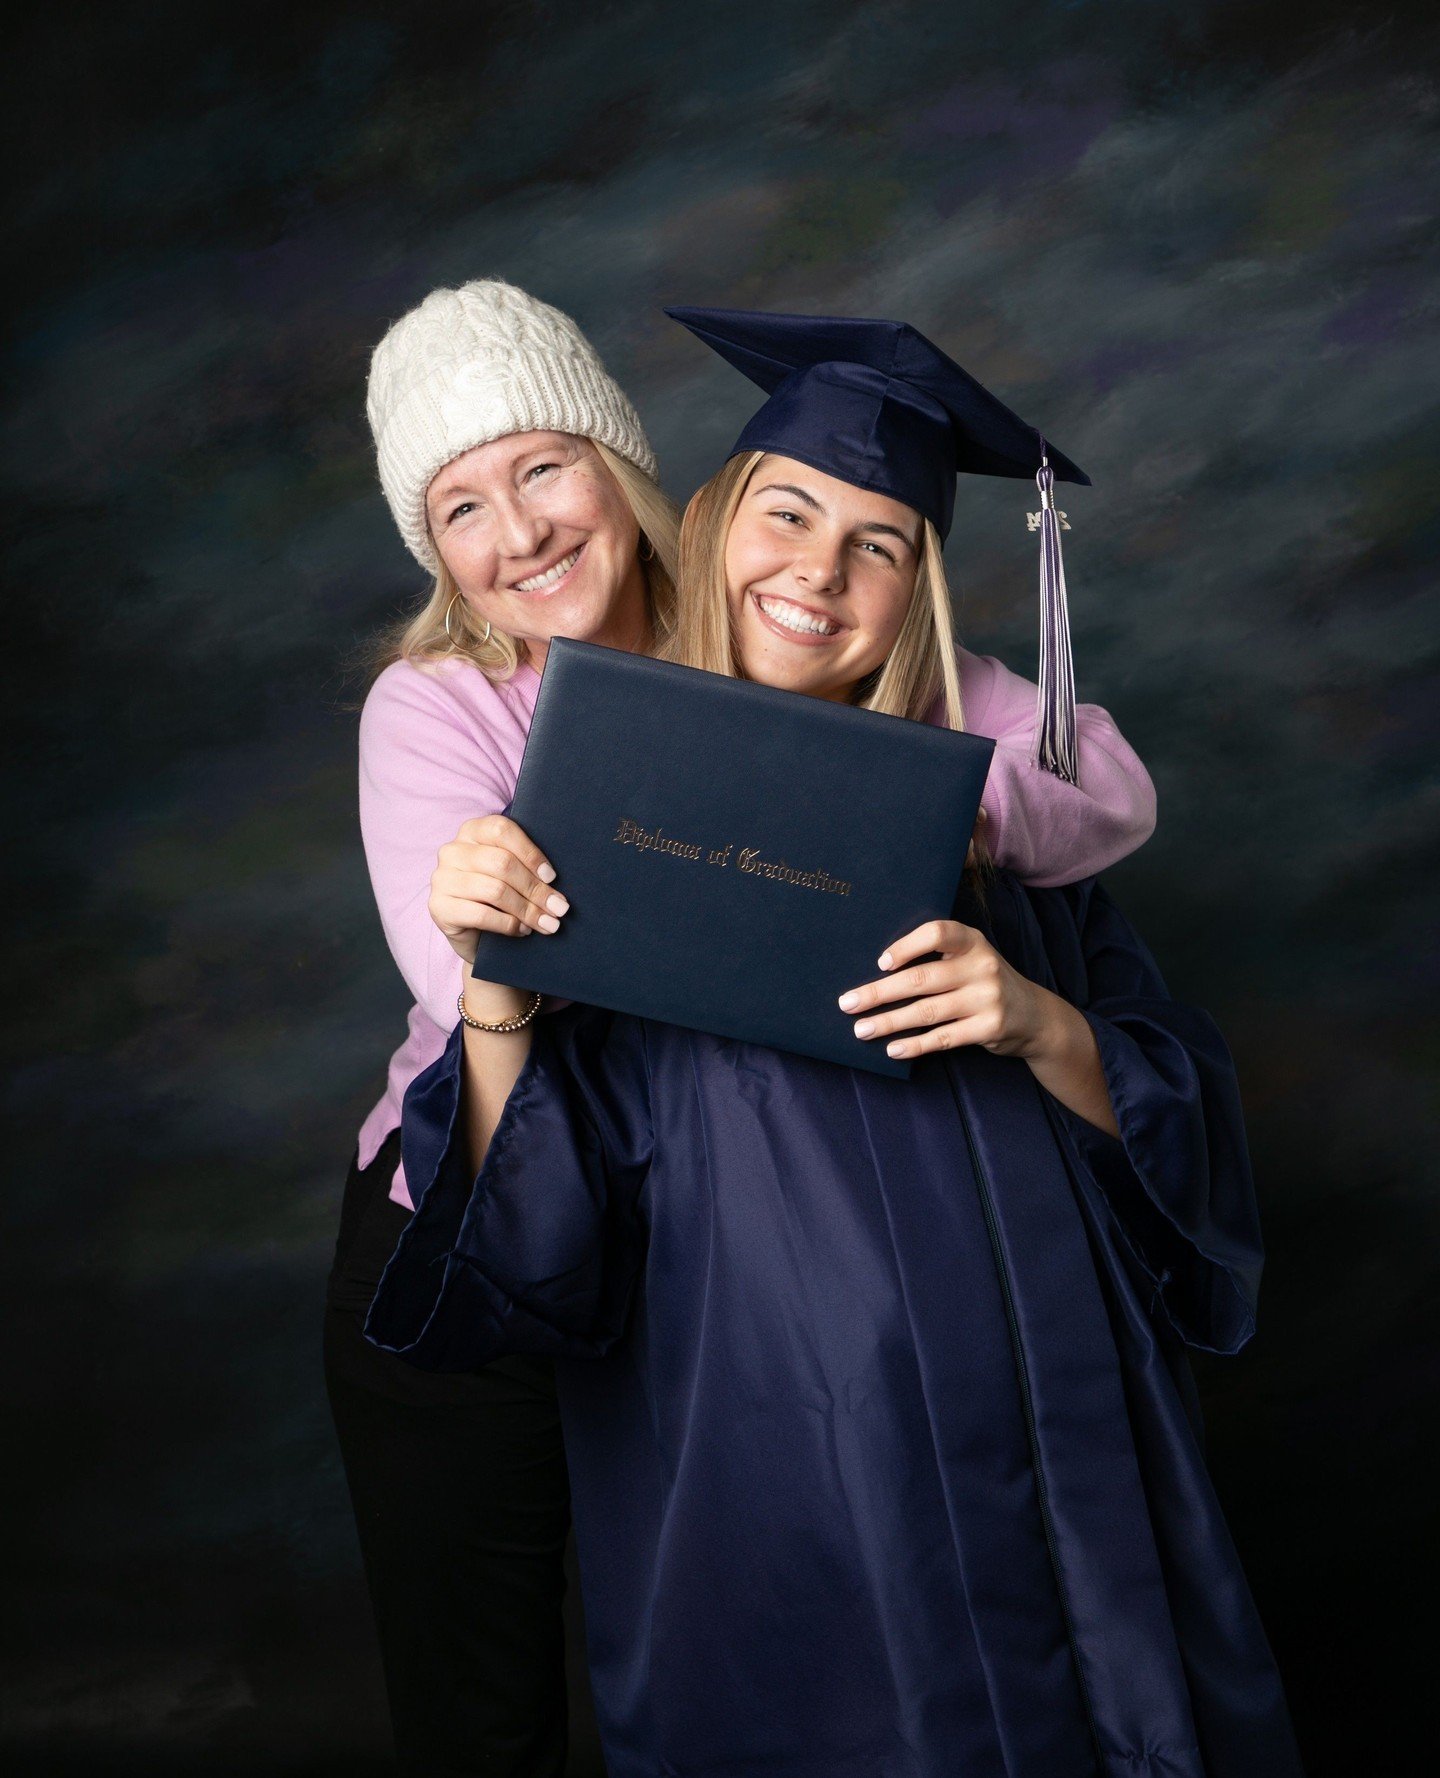 Parents; it's TOTALLY ok to hop in a photo or two with your senior. But better than this, consider a family photo before they jet off to their next phase in life.